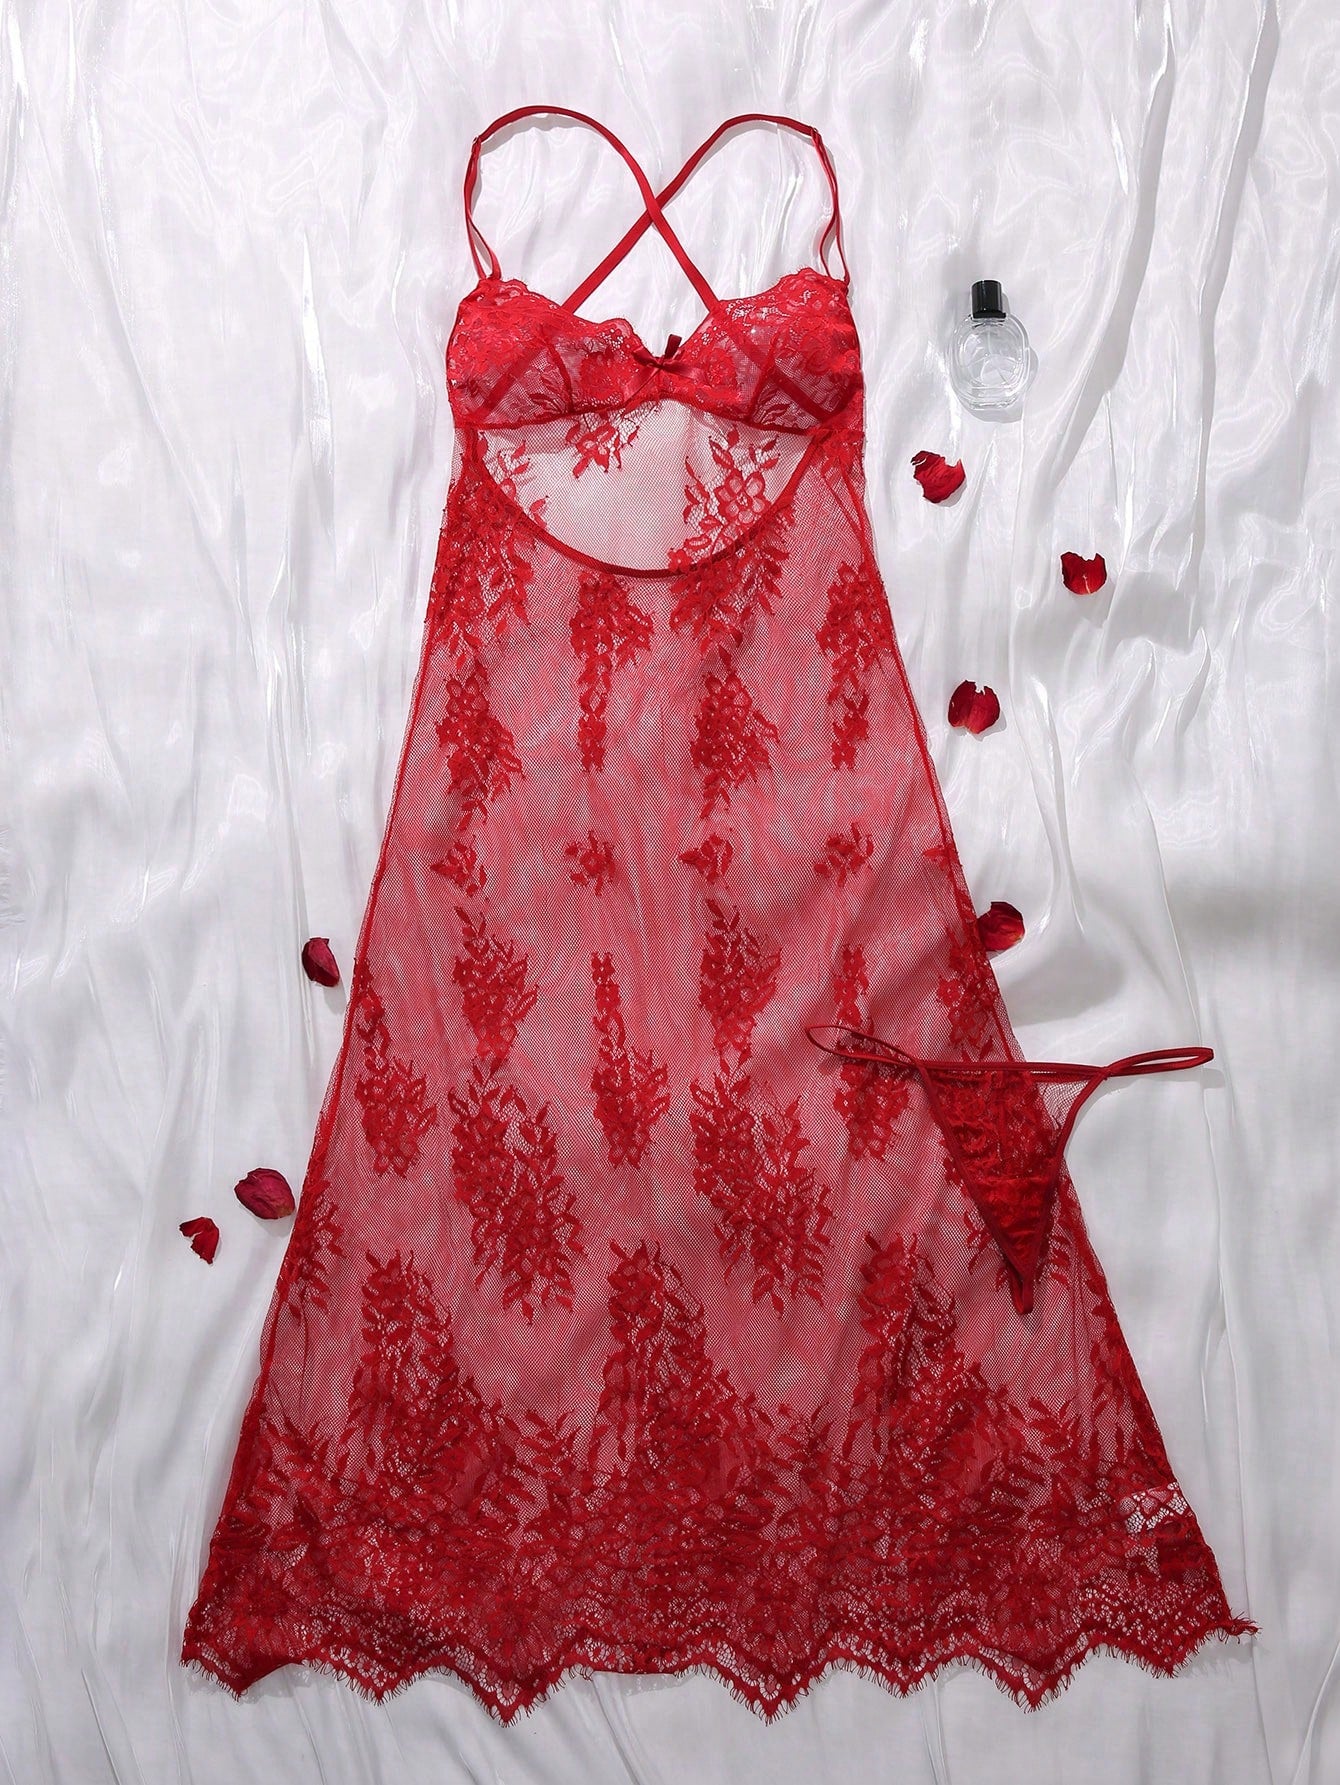 Floral Embroidery Sheer Mesh Sexy Lingerie Cami Dress & Thong Set